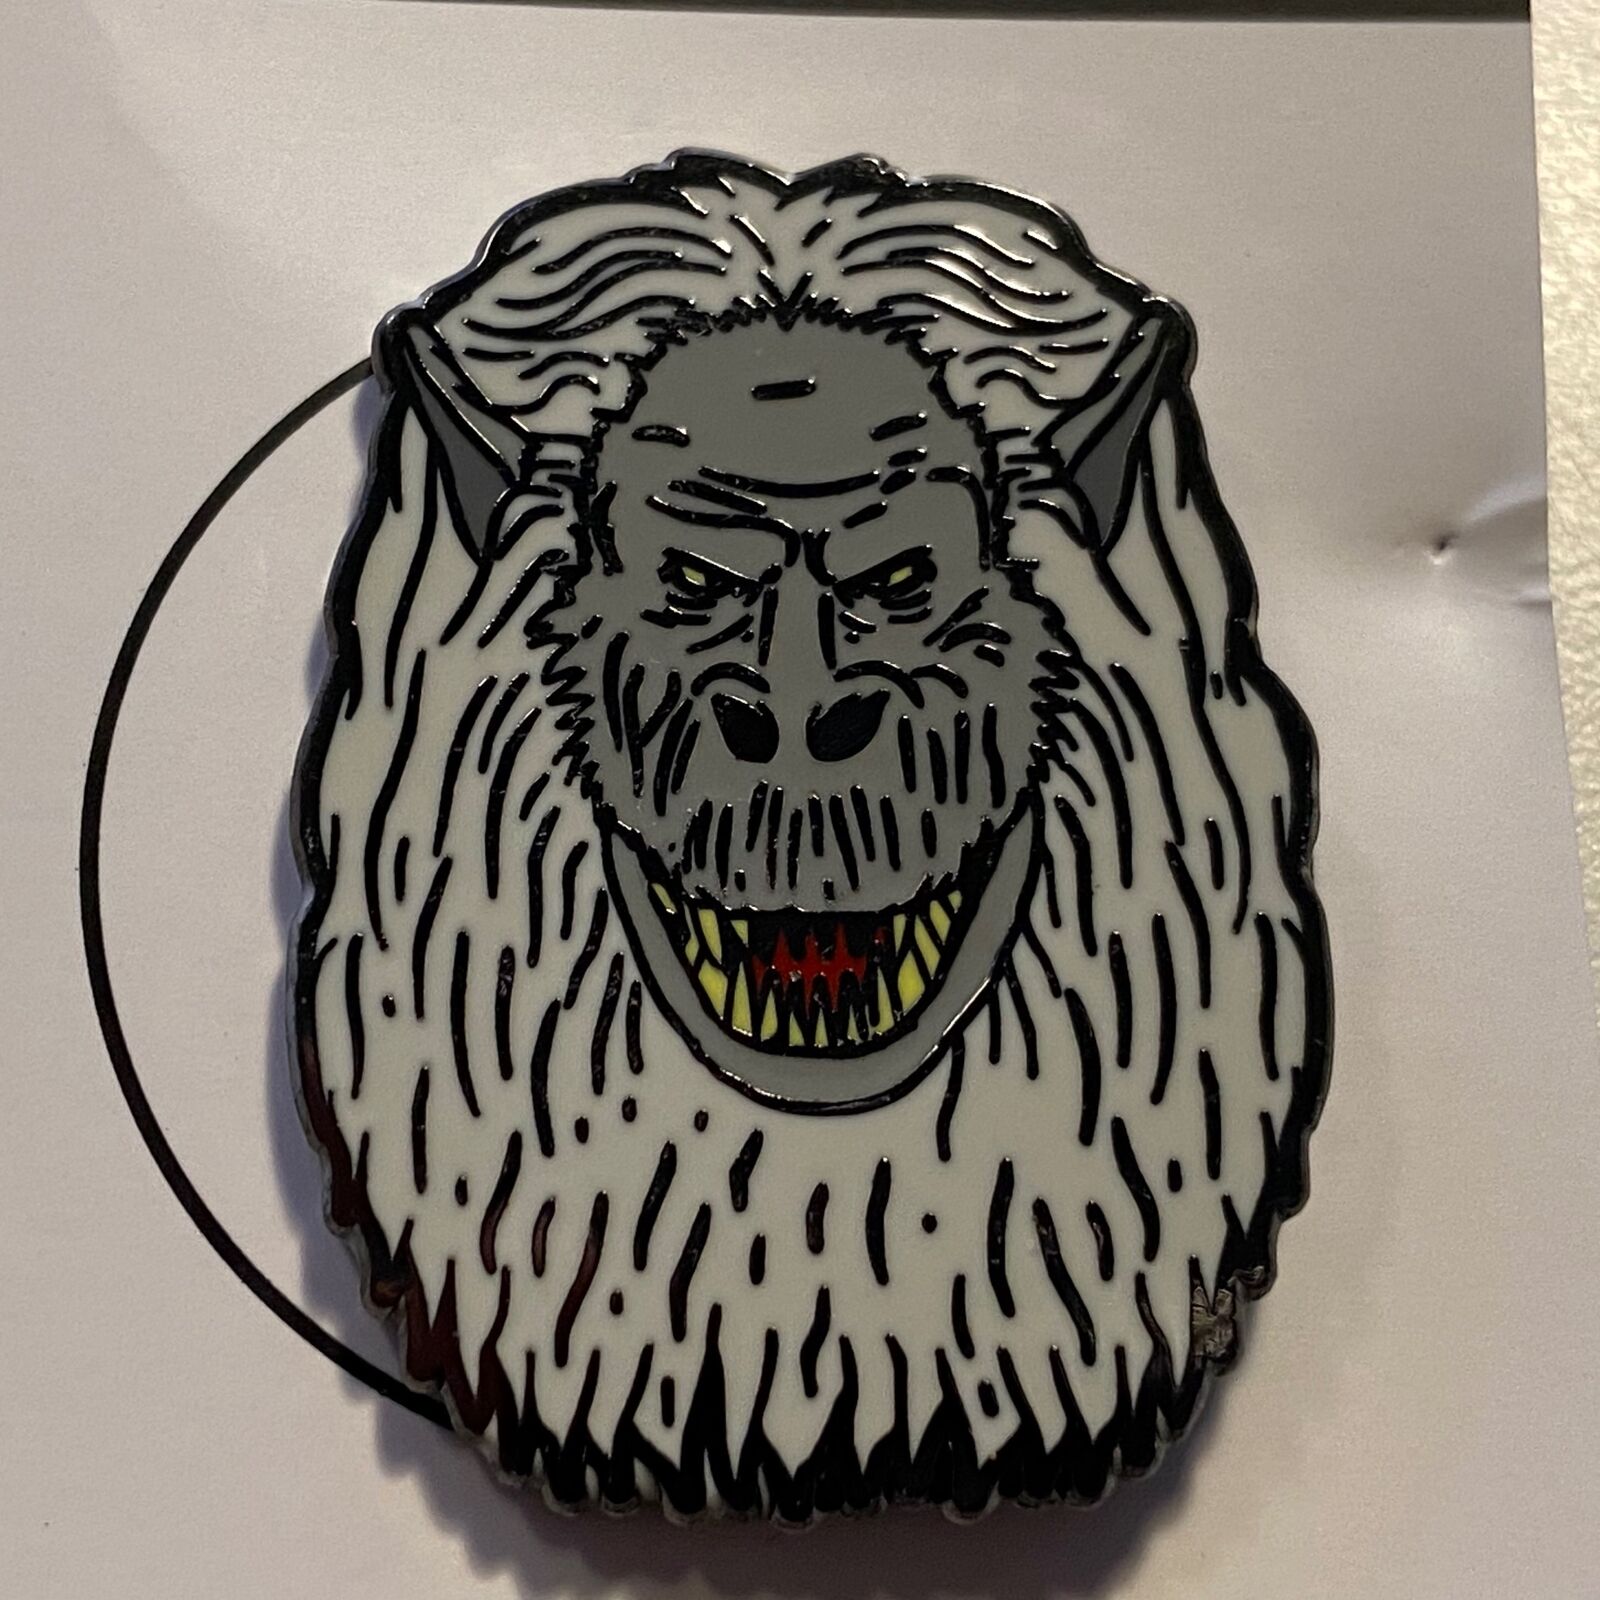 Creepshow Fluffy the Crate Monster Bam Horror Box Enamel Pin LE New Limited